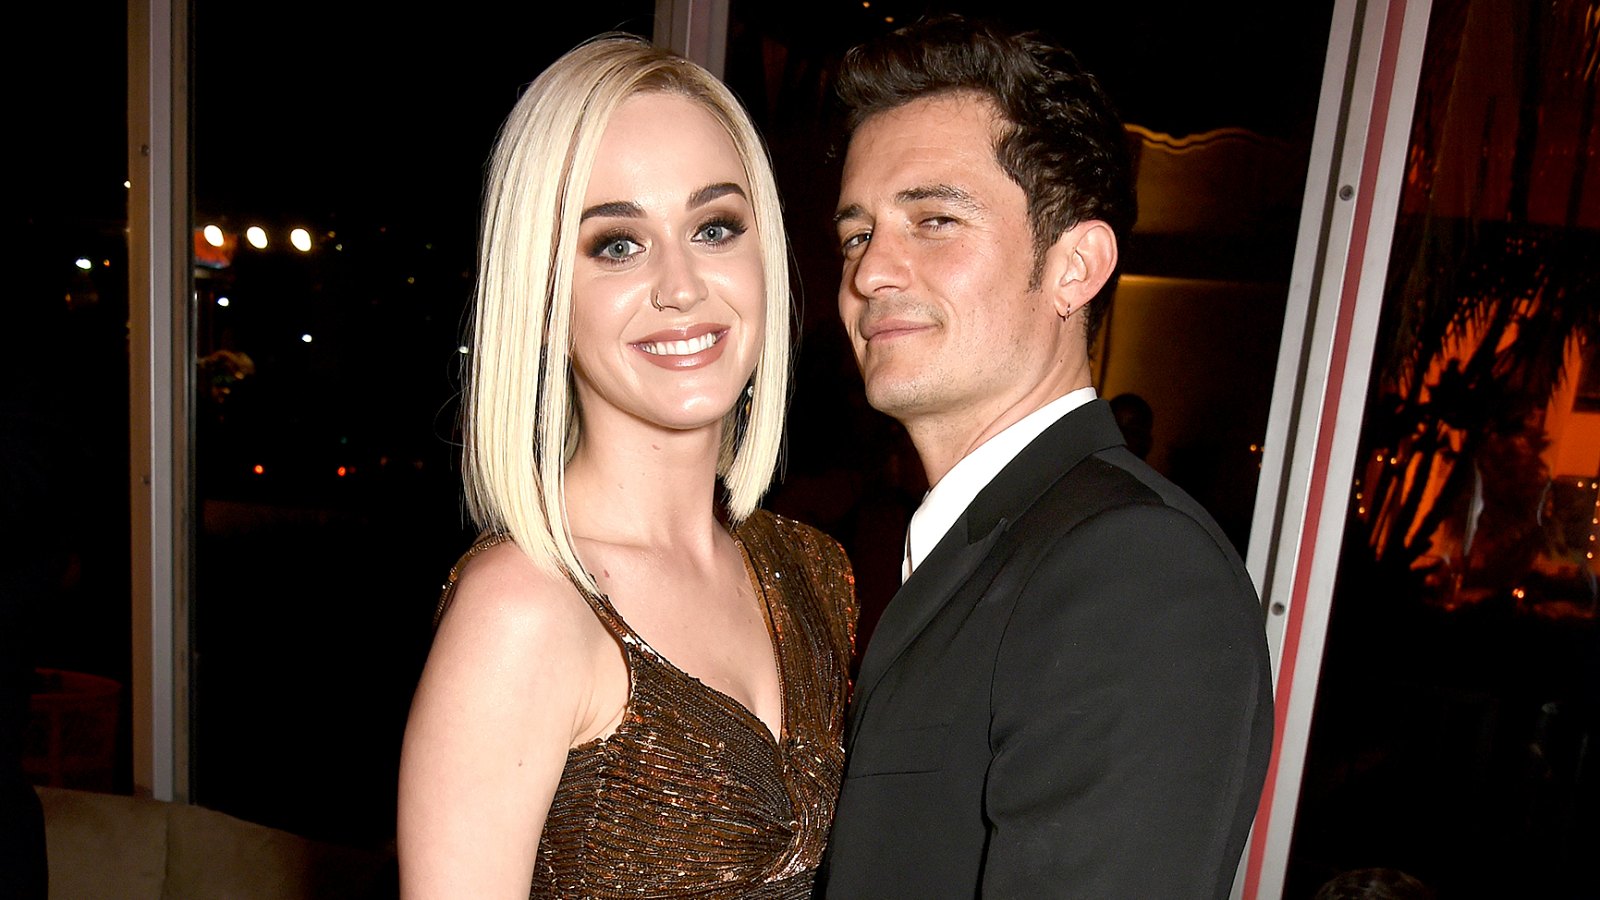 Katy Perry and Orlando Bloom attend the 2017 Vanity Fair Oscar Party hosted by Graydon Carter at Wallis Annenberg Center for the Performing Arts on February 26, 2017 in Beverly Hills, California.